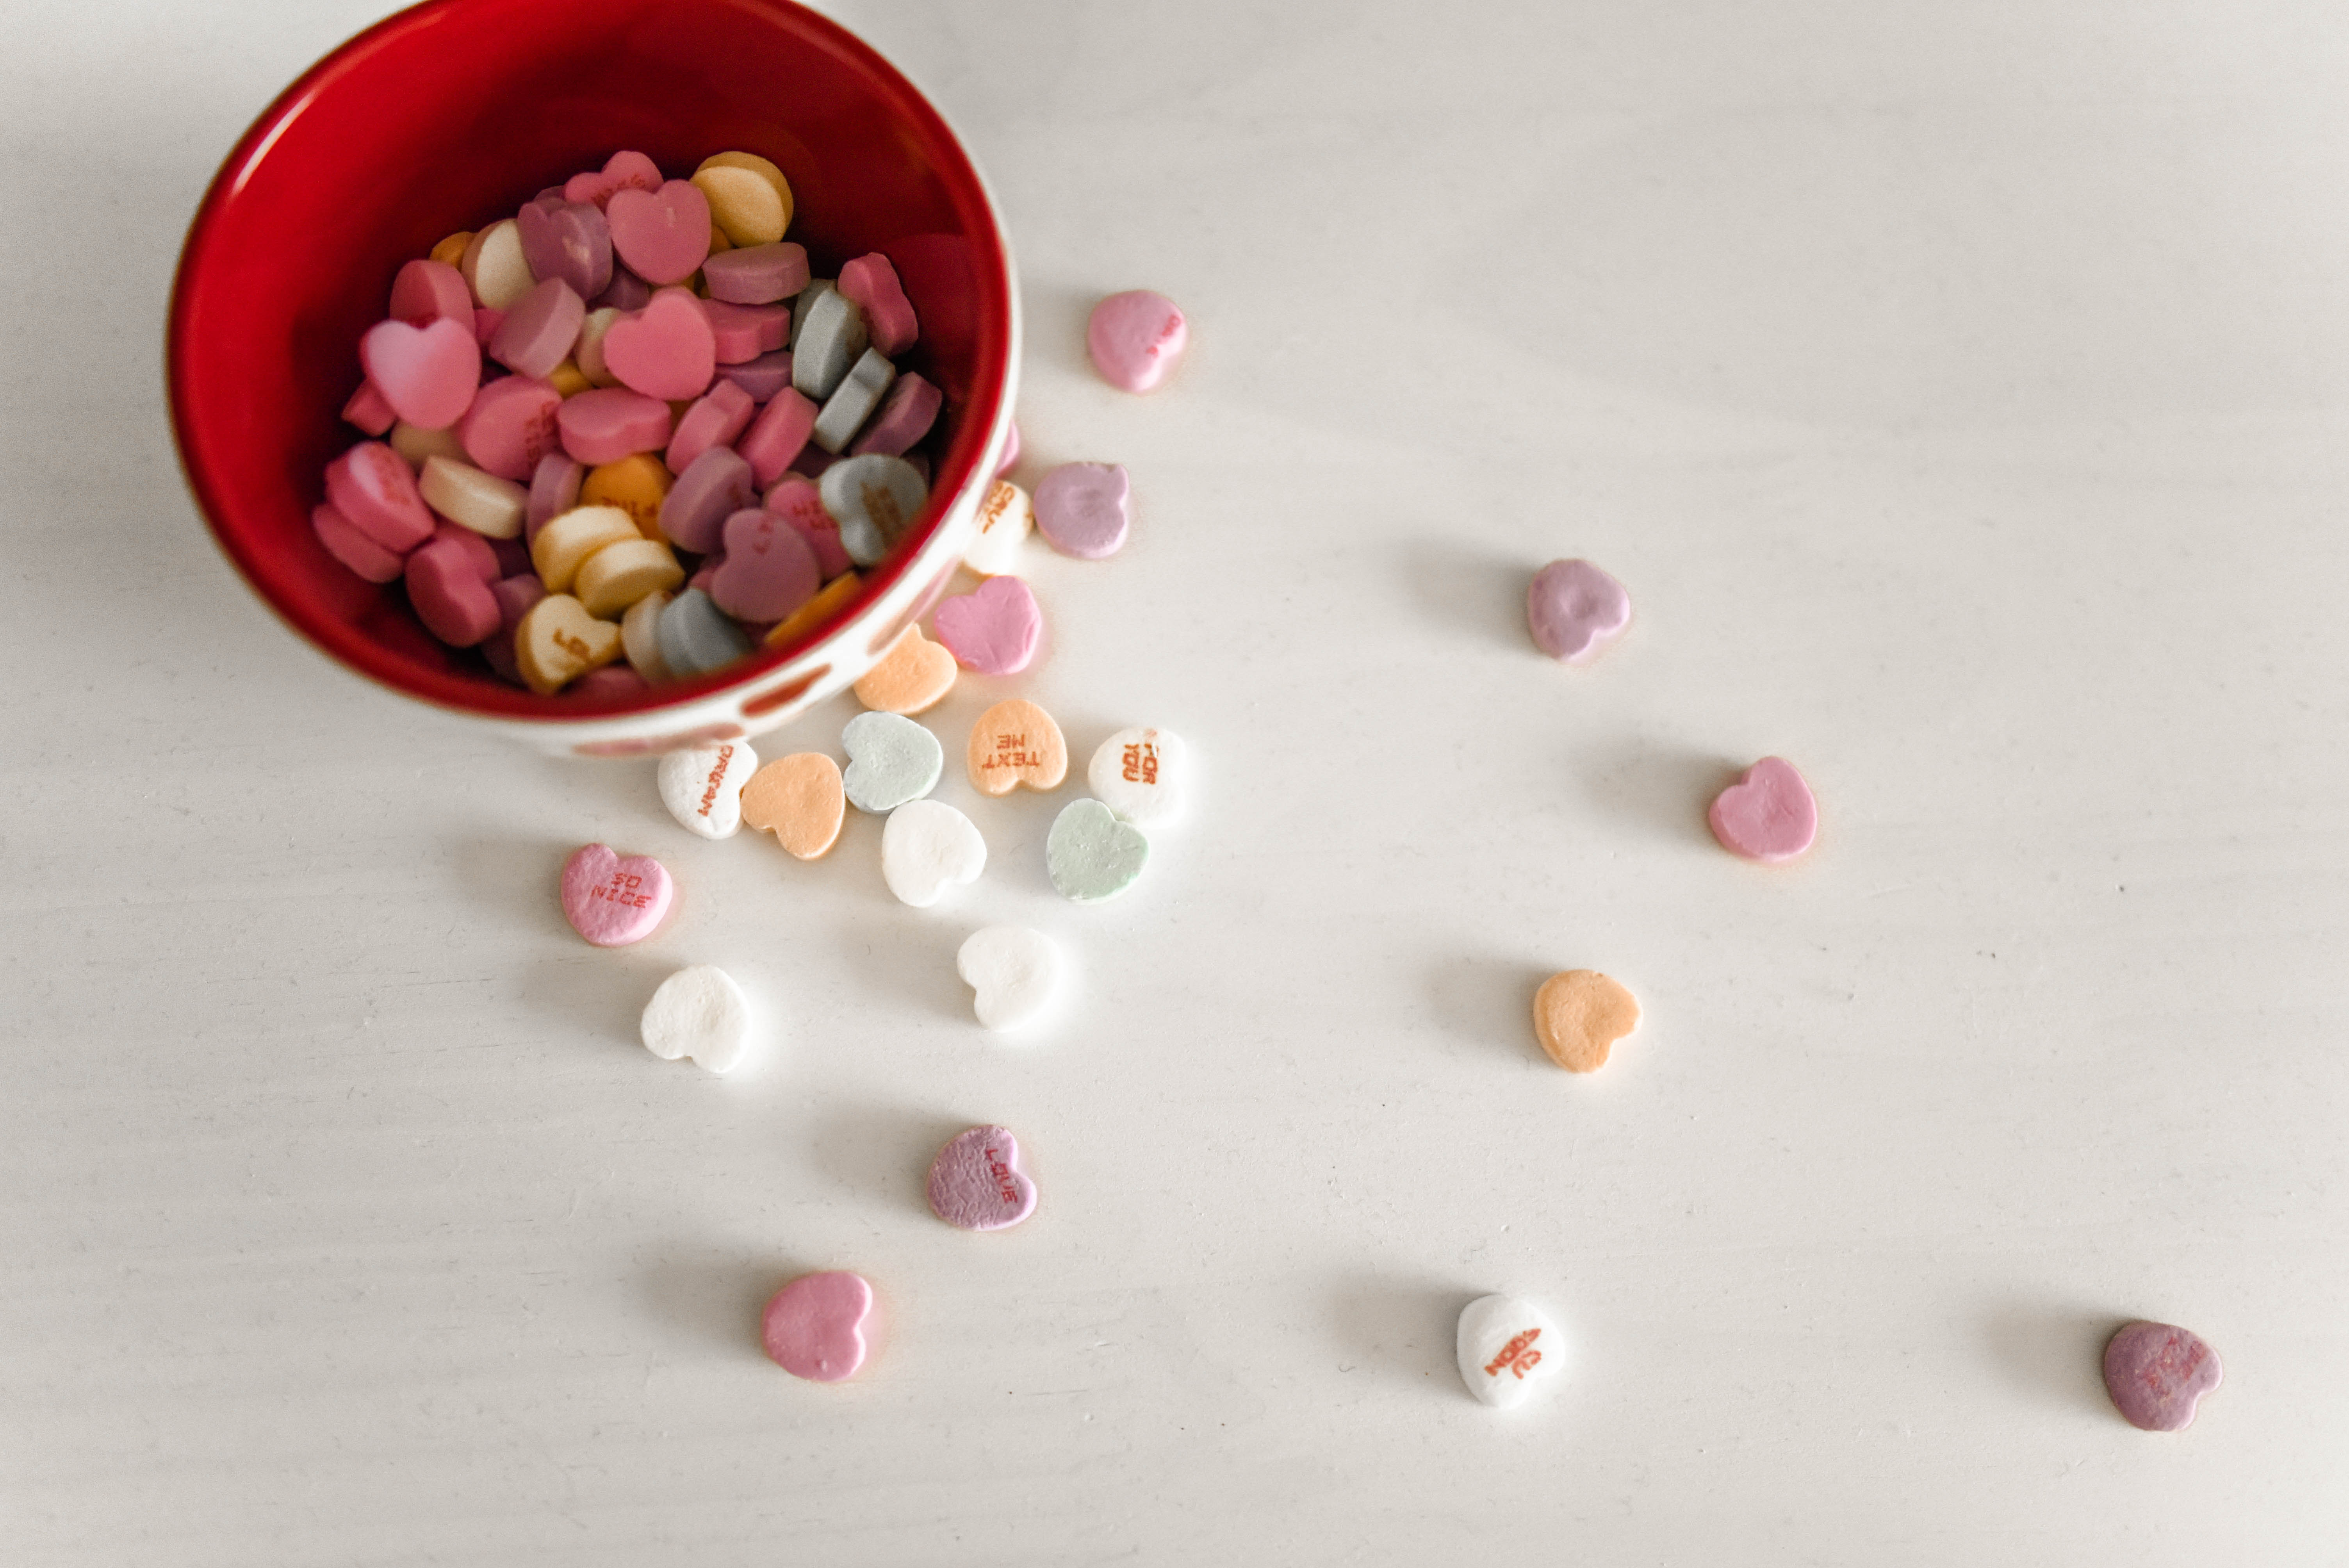 Red bowl of colorful conversation hearts on a white backdrop with conversation heart candy spilled over the side.